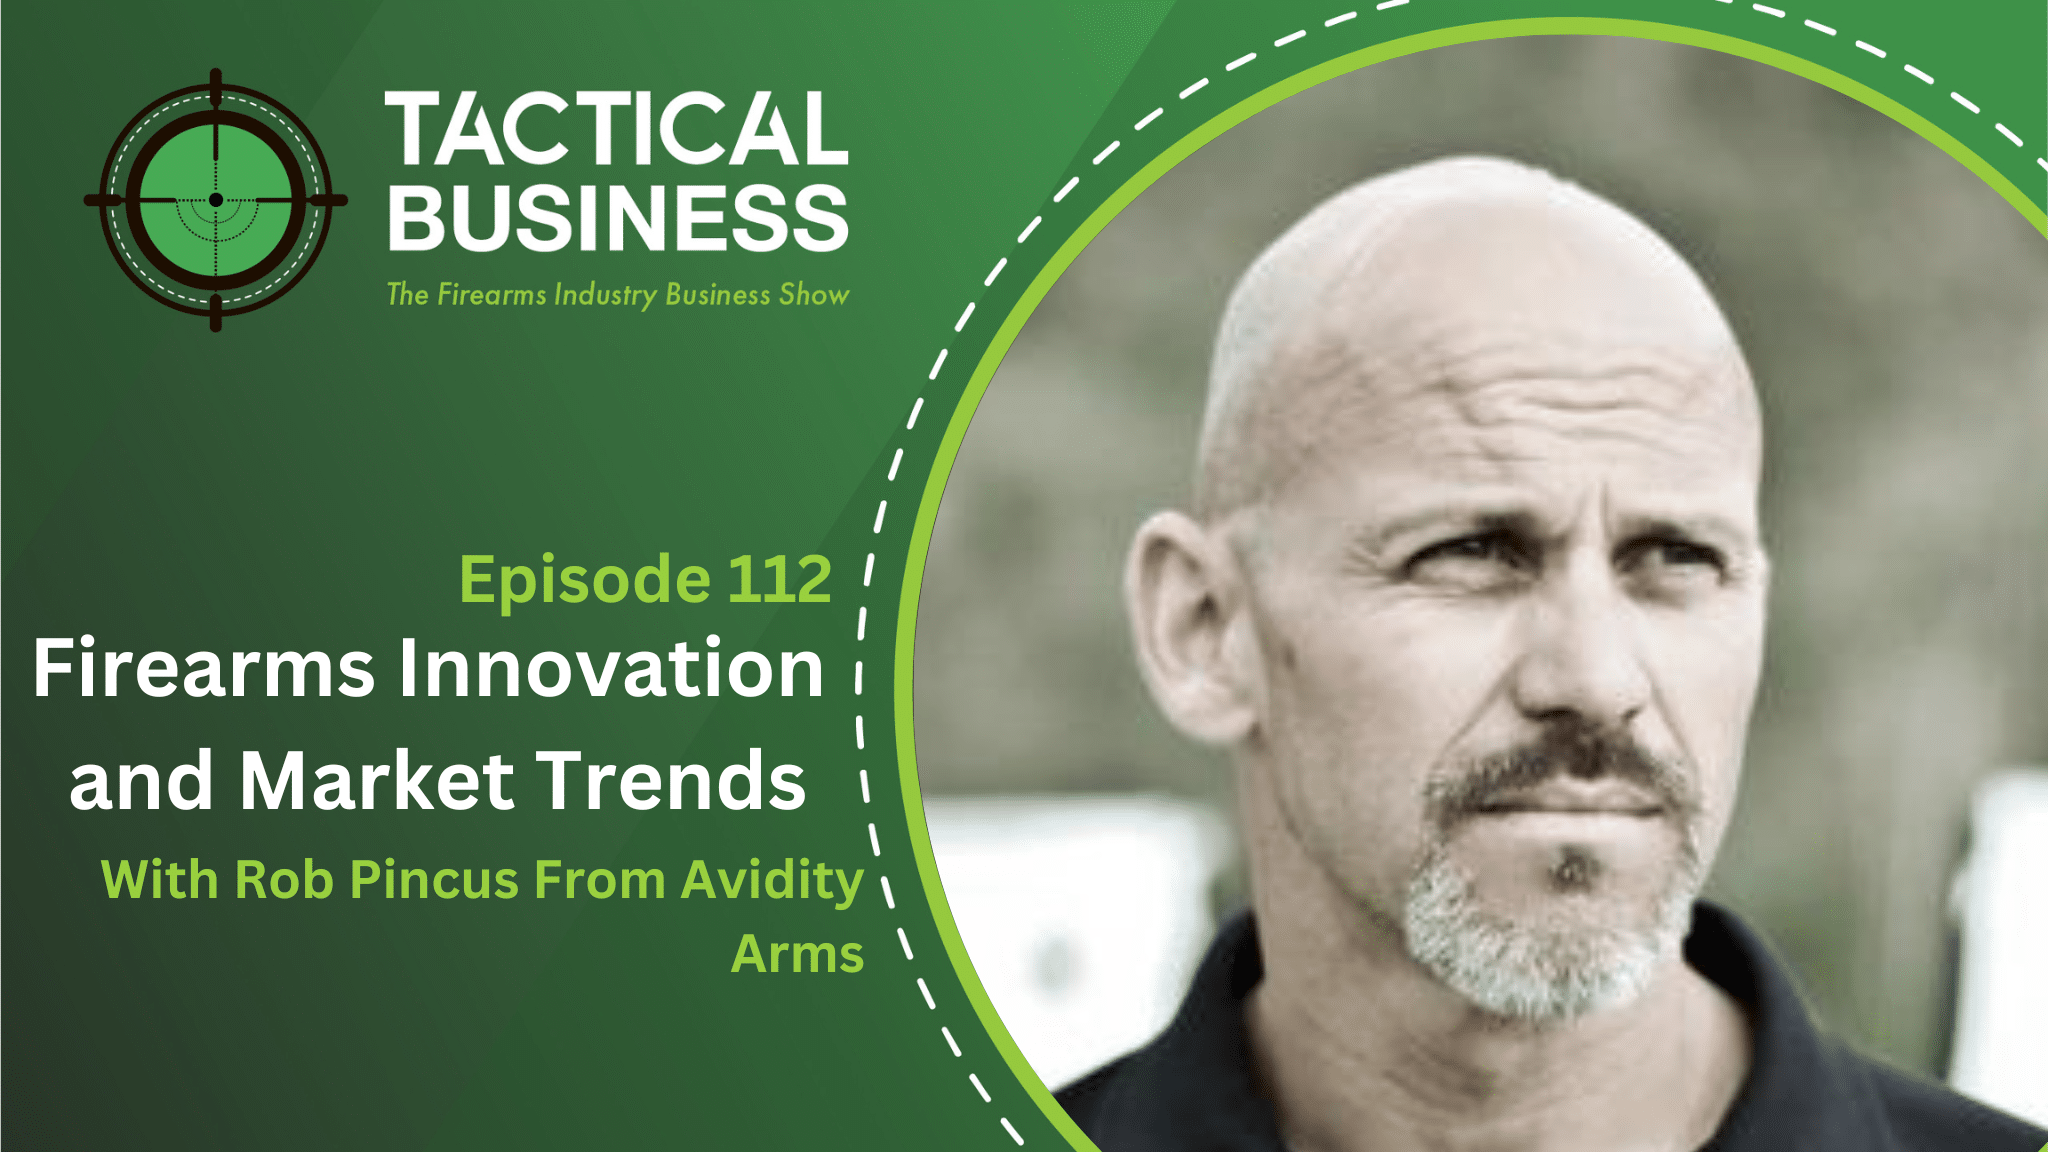 Firearms Innovation and Market Trends With Rob Pincus From Avidity Arms